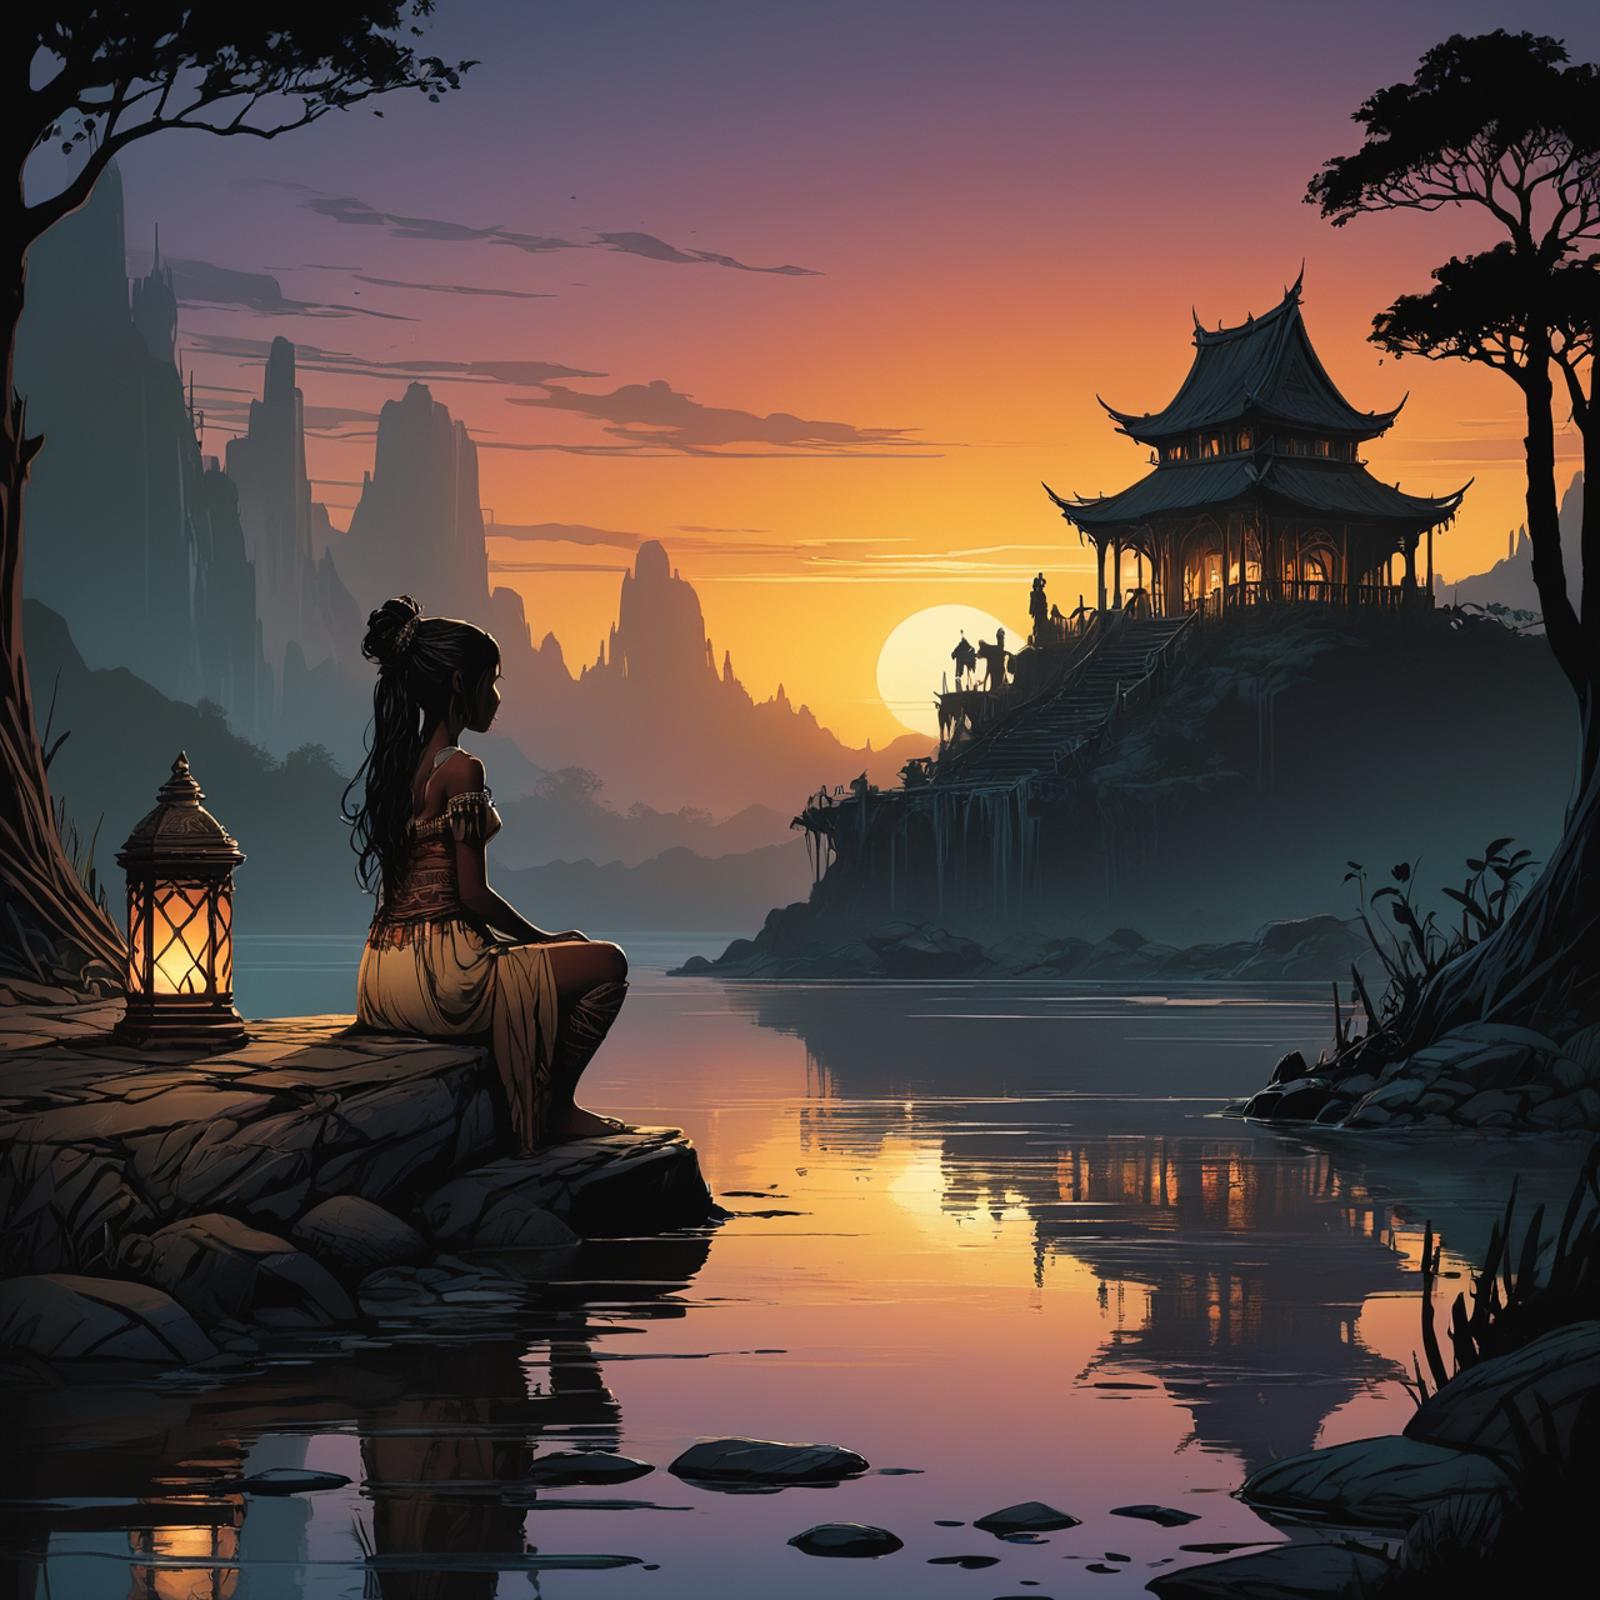 A young woman sits by a lake at sunset with a pagoda in the background.